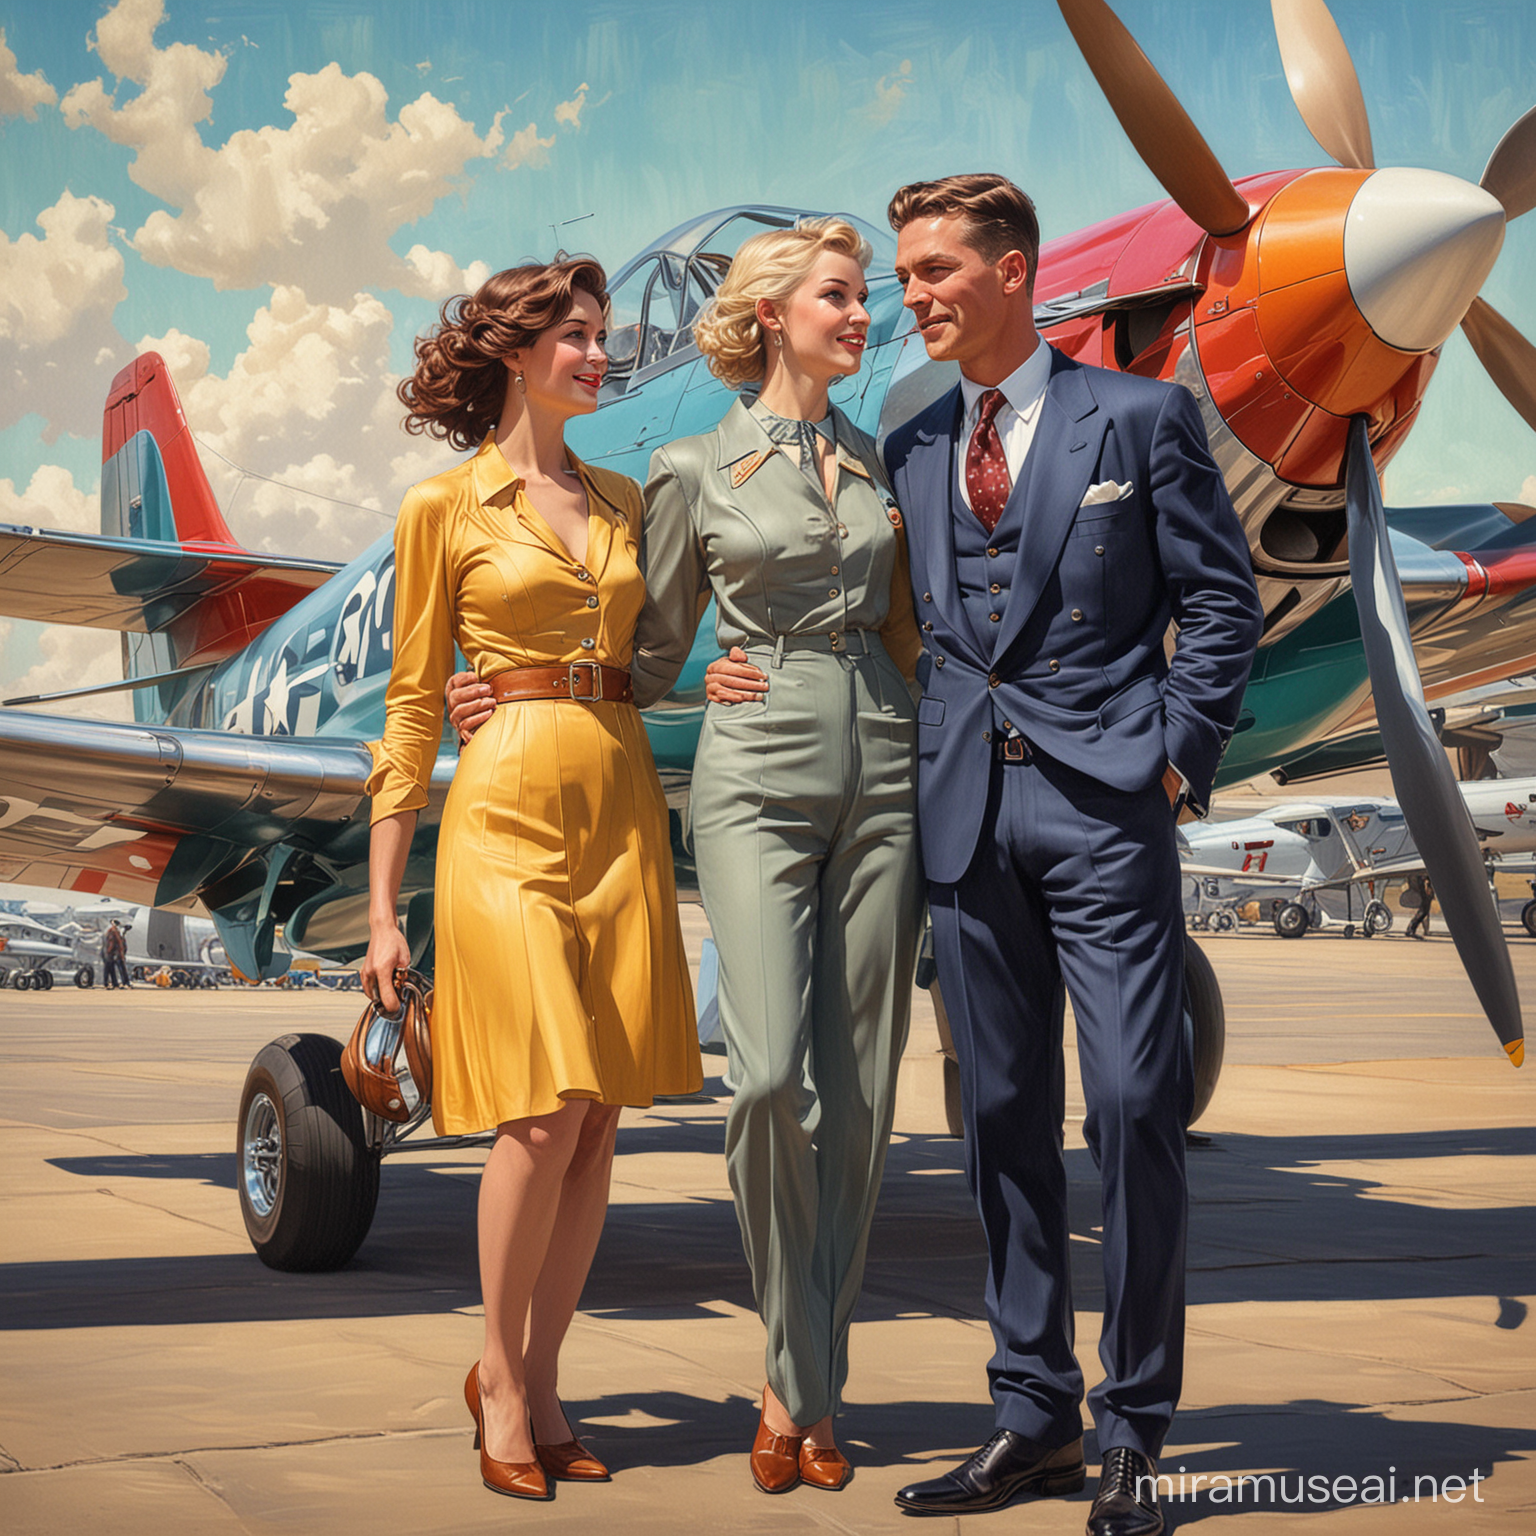 Vintage Aviation Couple with Colorful Art Nouveau Style and Mustang Aircraft Background